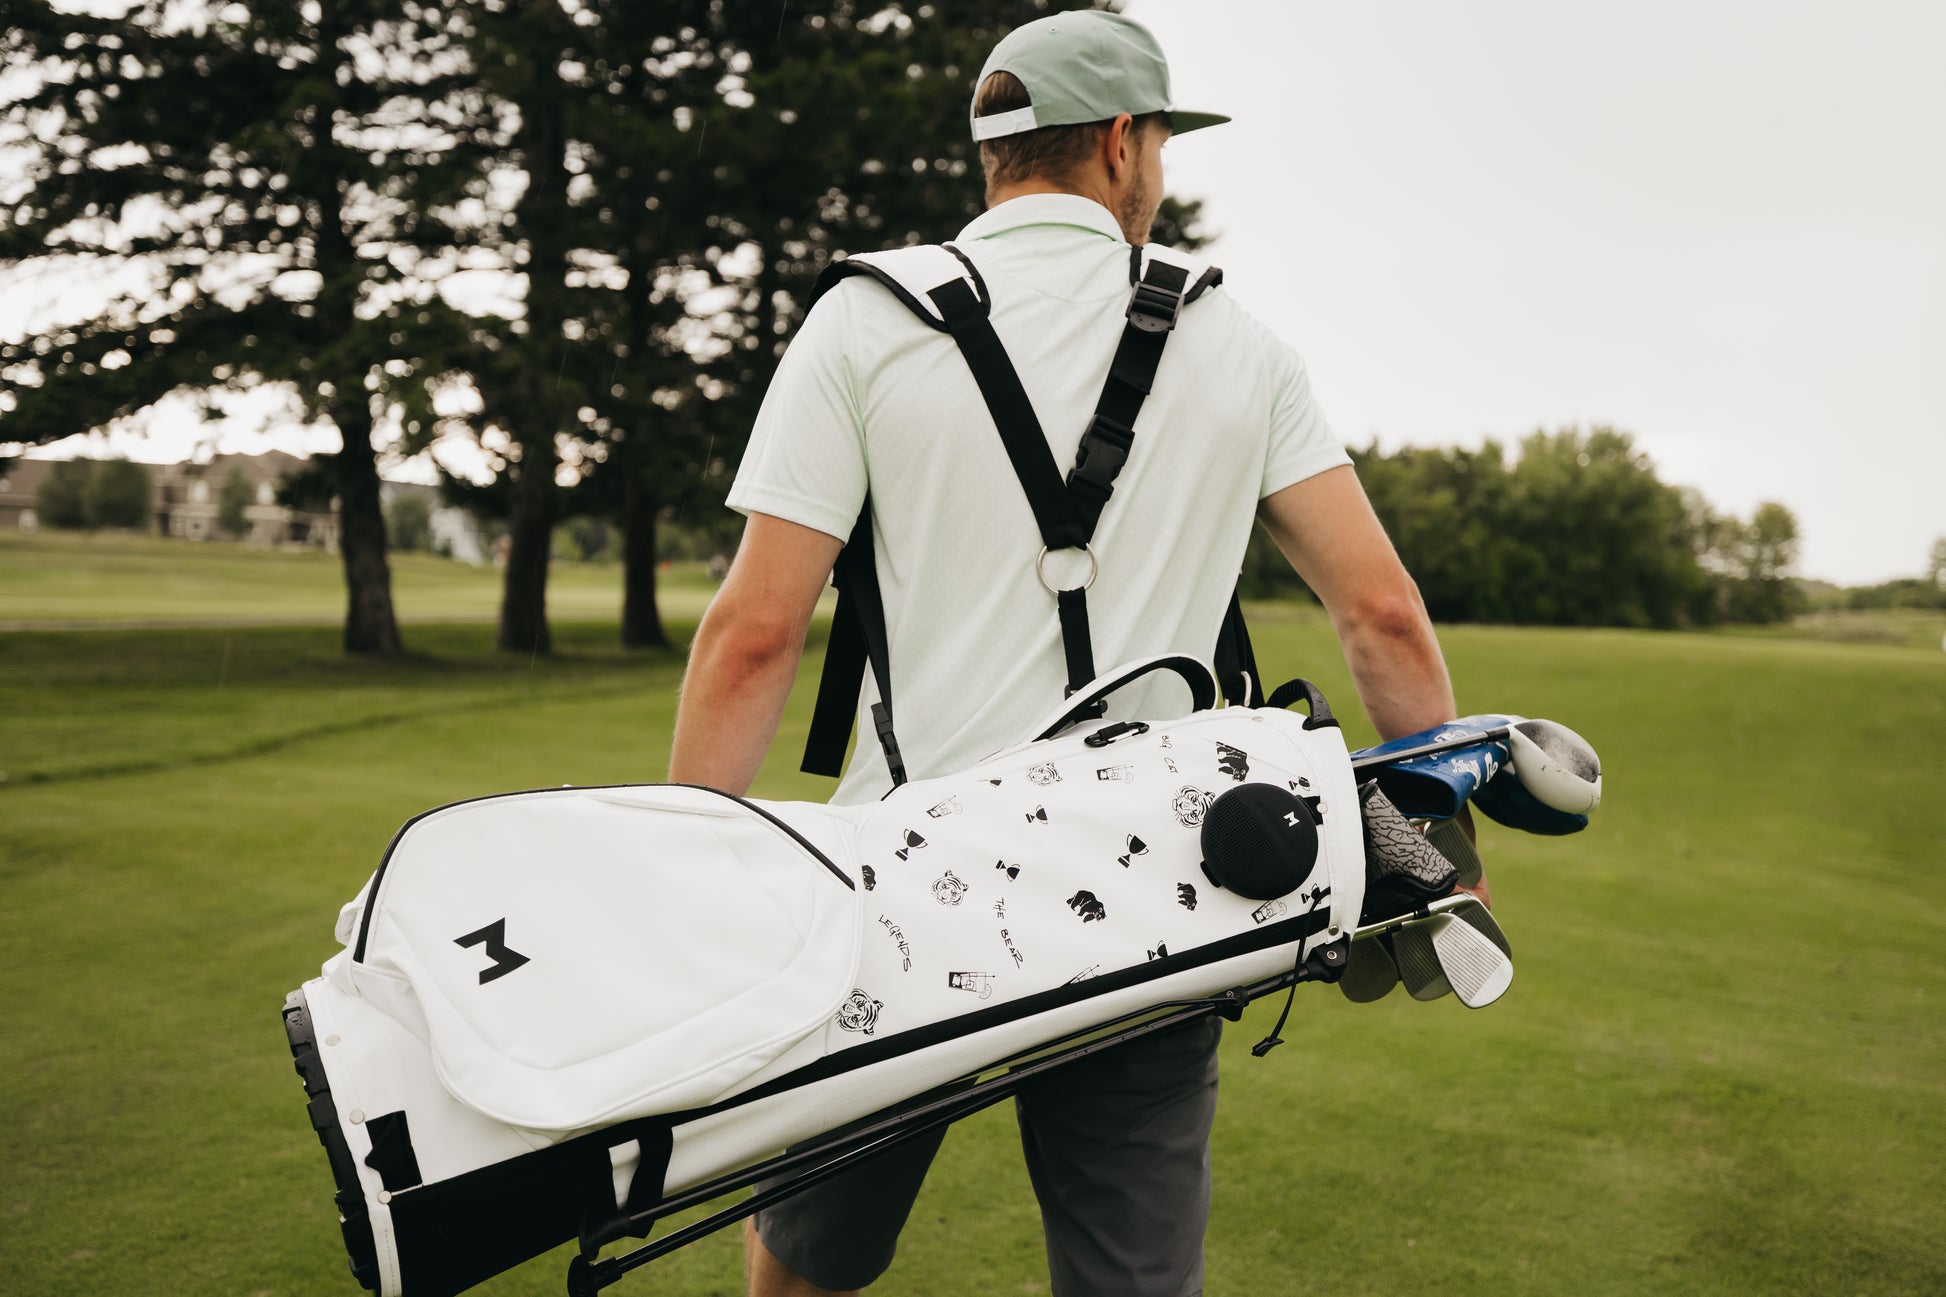 MNML GOLF's collaboration with Swannies showcases the MV2 model and hand painted Swannies graphics. This bag has a double strap mechanism for lasting comfort on the course.